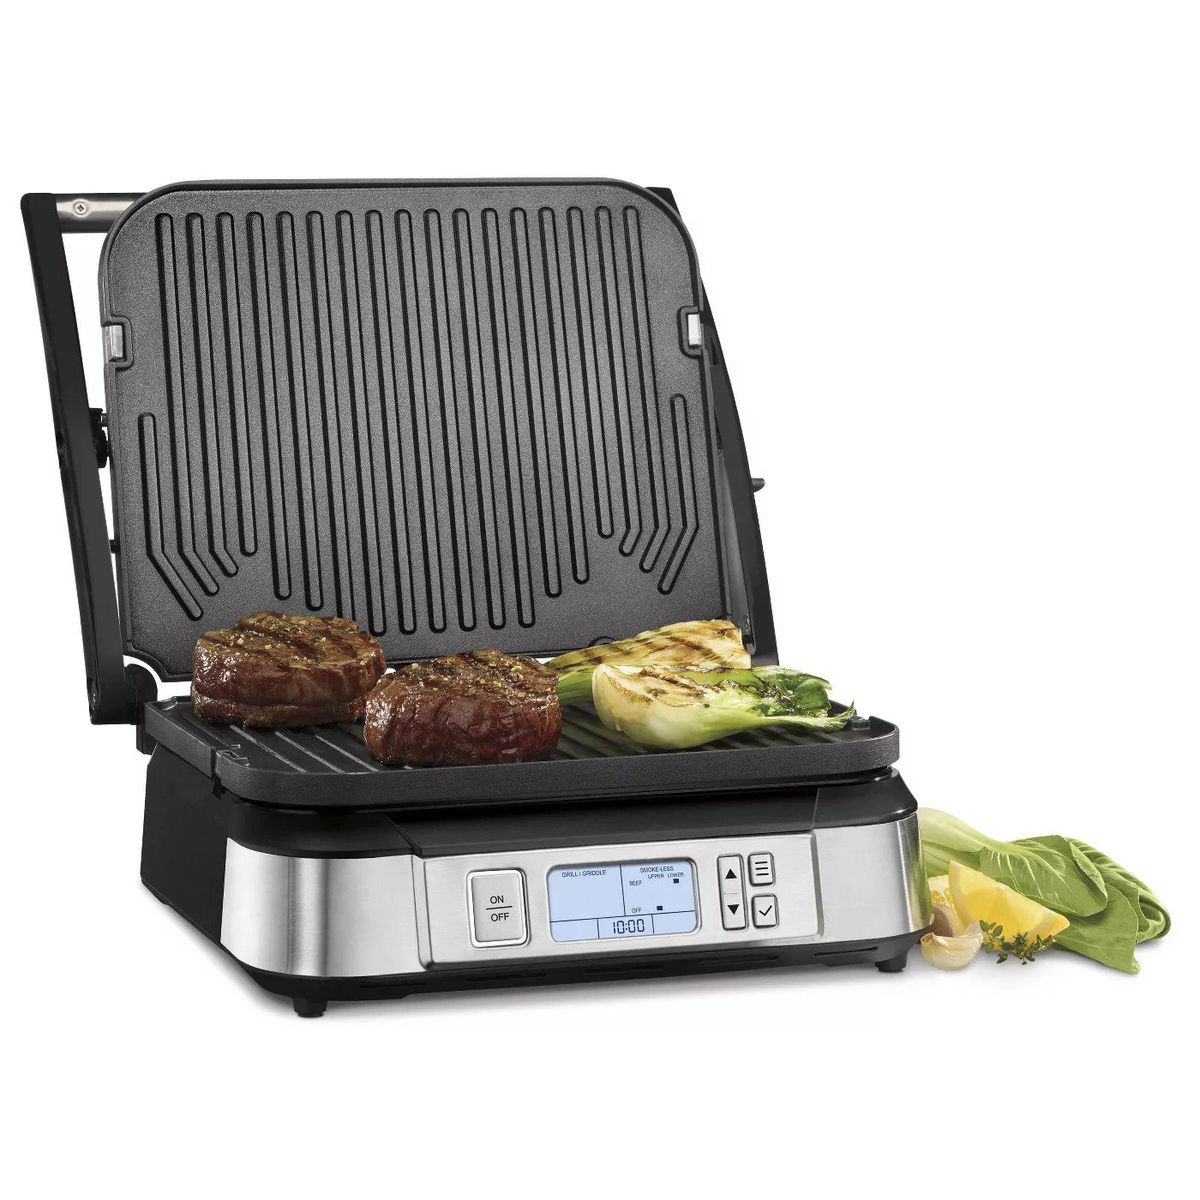 A panini press, open and cooking a couple burgers and vegetables